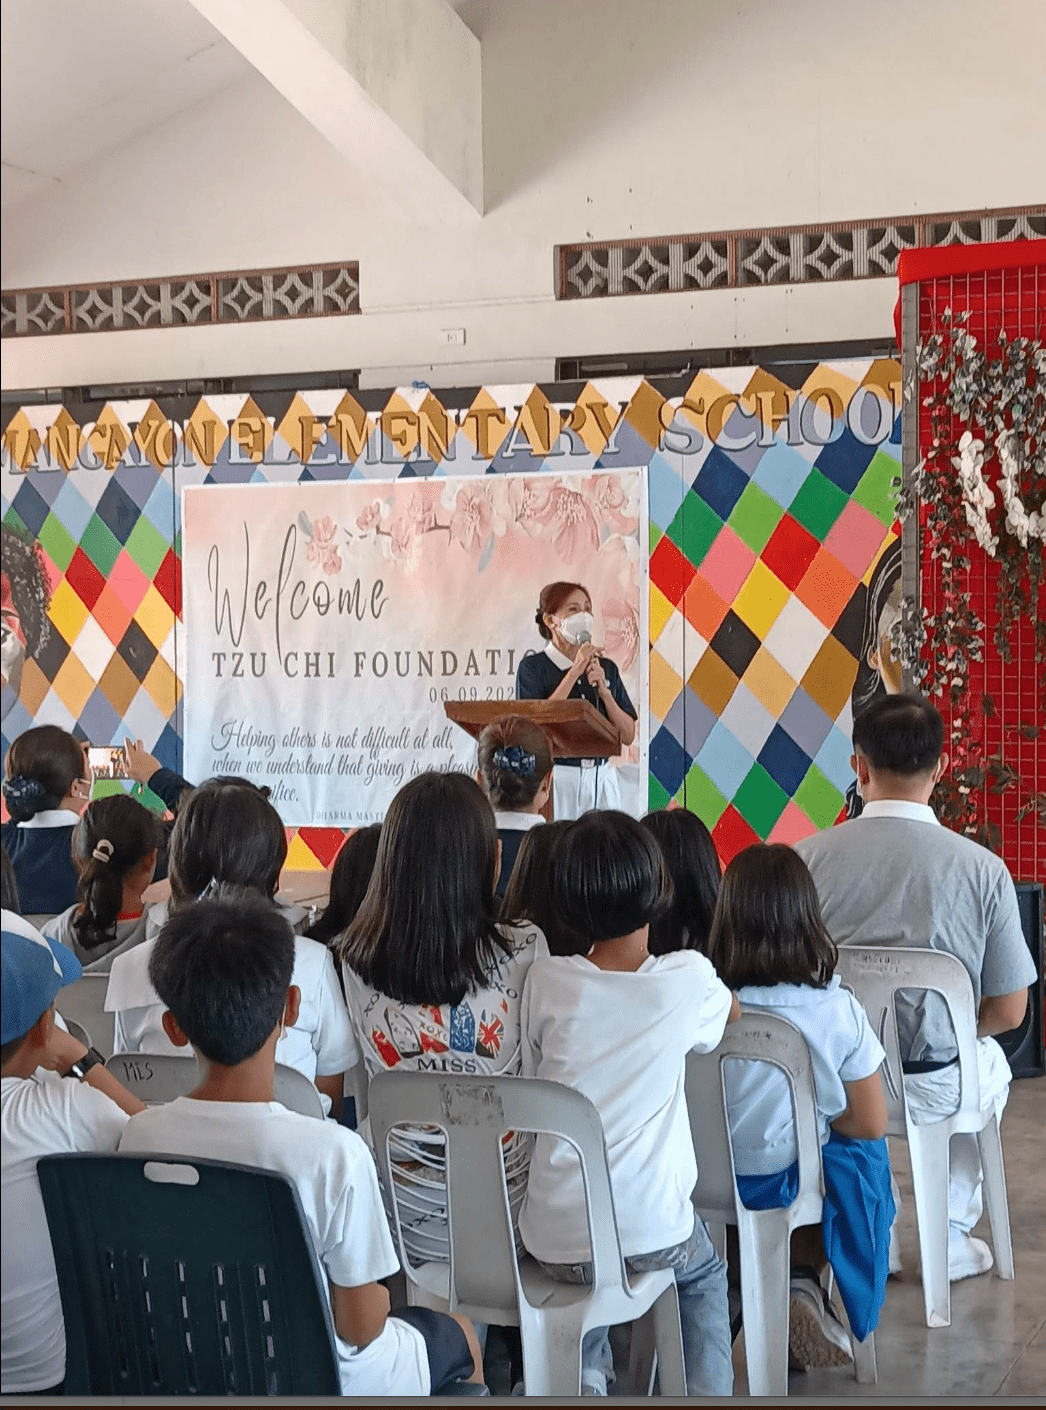 Tzu Chi Davao volunteer Mei Yuan Ang shares the history behind Tzu Chi Foundation during a visit to Mangayon Elementary School on June 9, 2023. (Photo courtesy of Mangayon Elementary School Facebook Page)